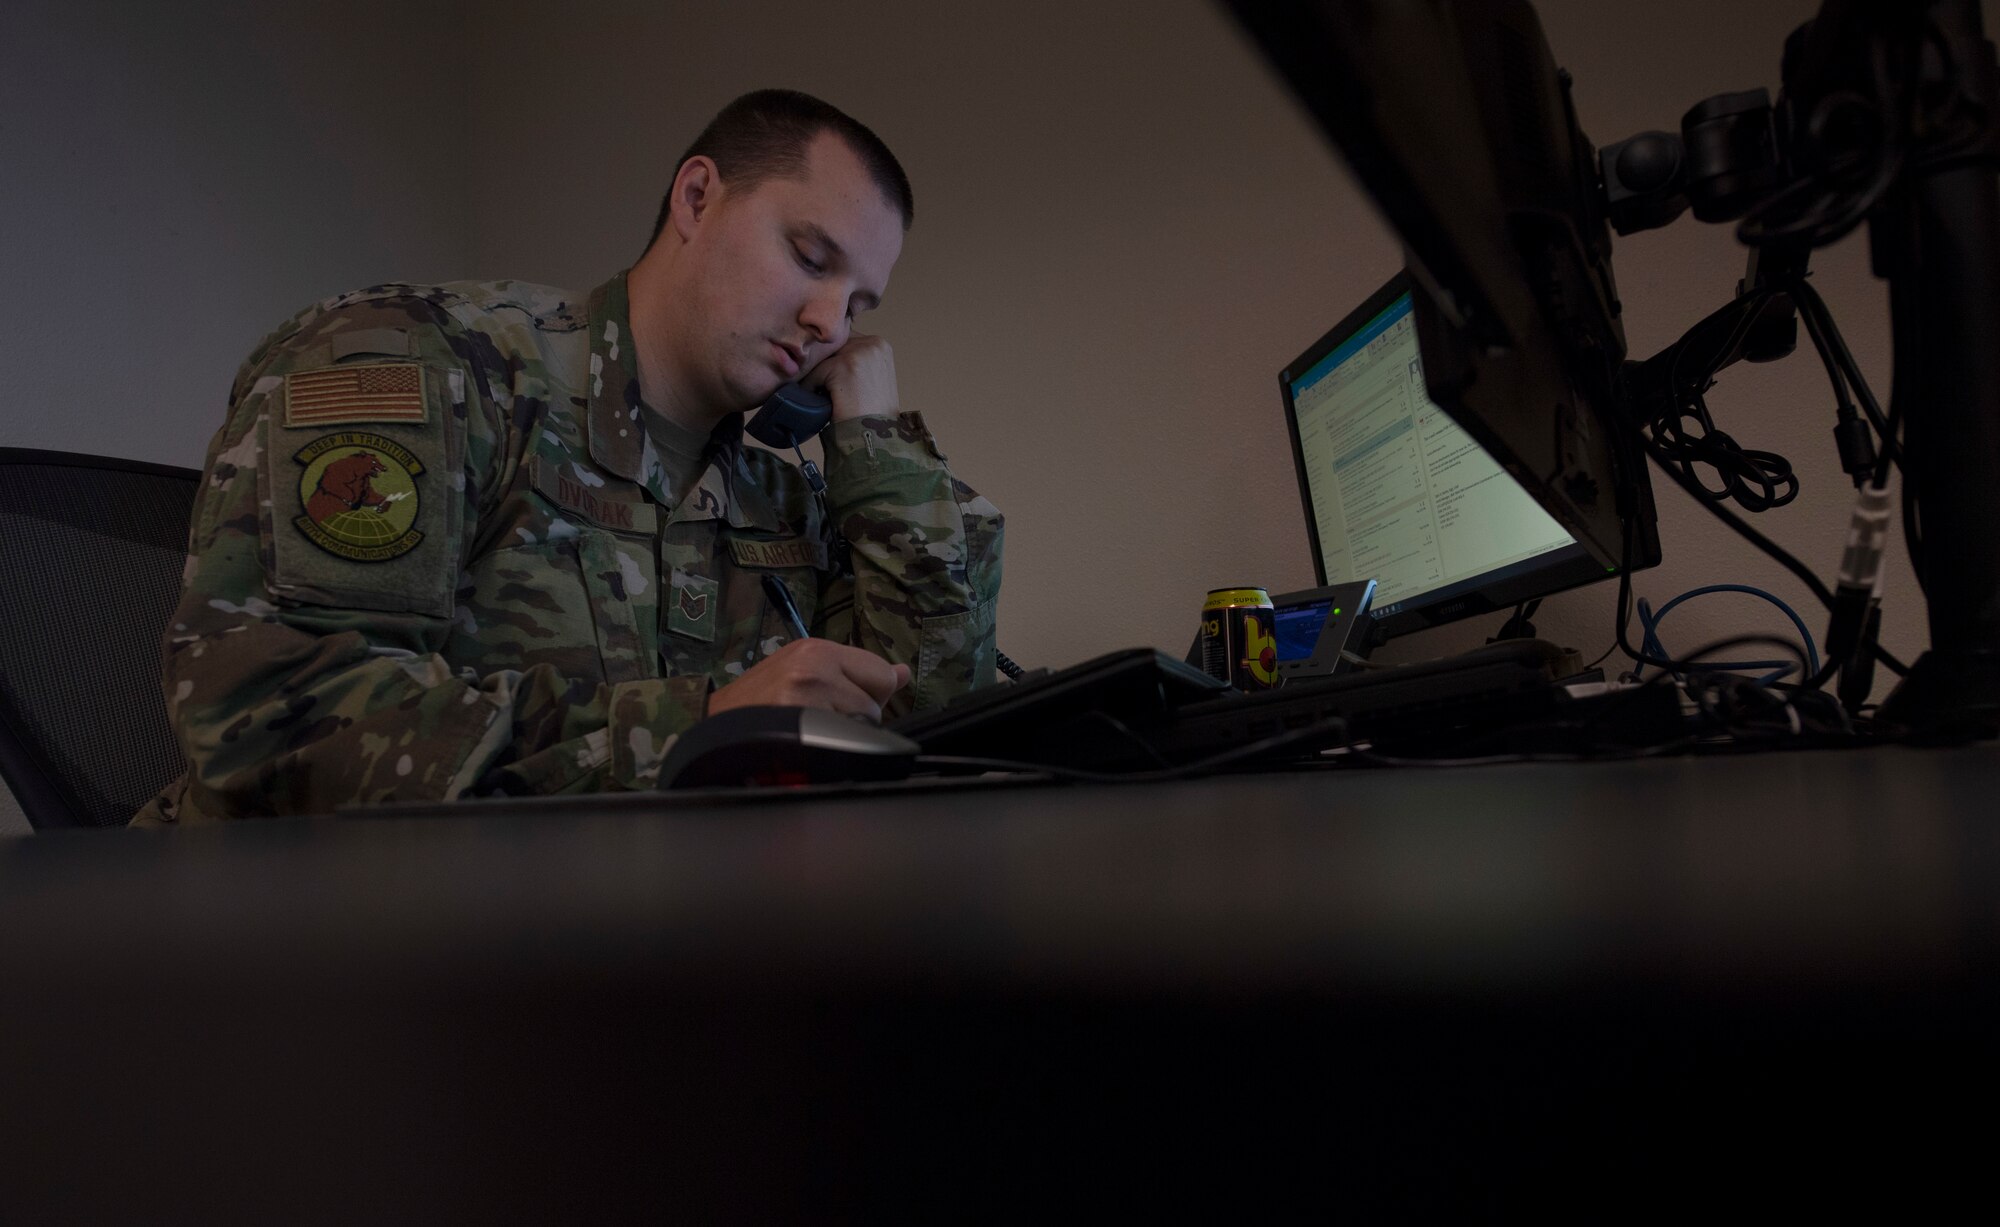 Airmen assigned to the 60th Communications Squadron work behind computers to keep Travis' mission operating.